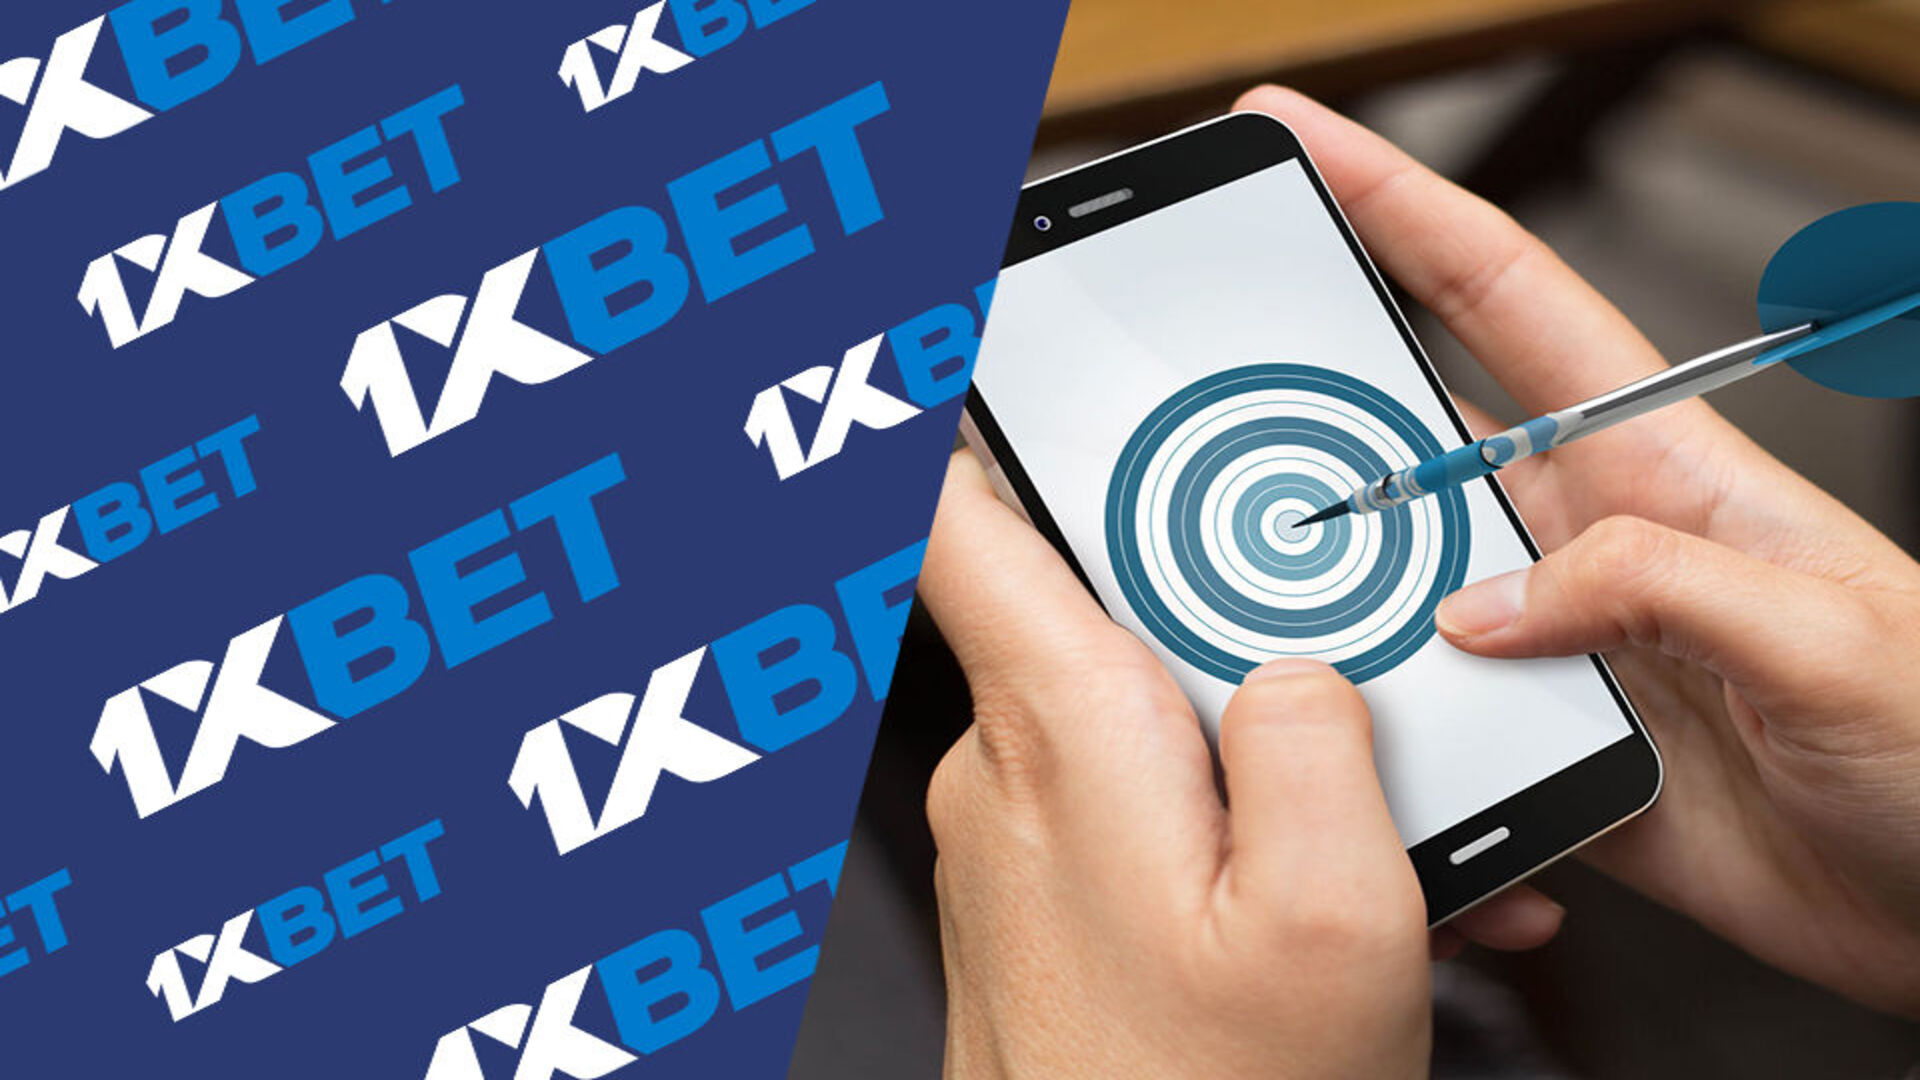 1xbet withdrawal problem